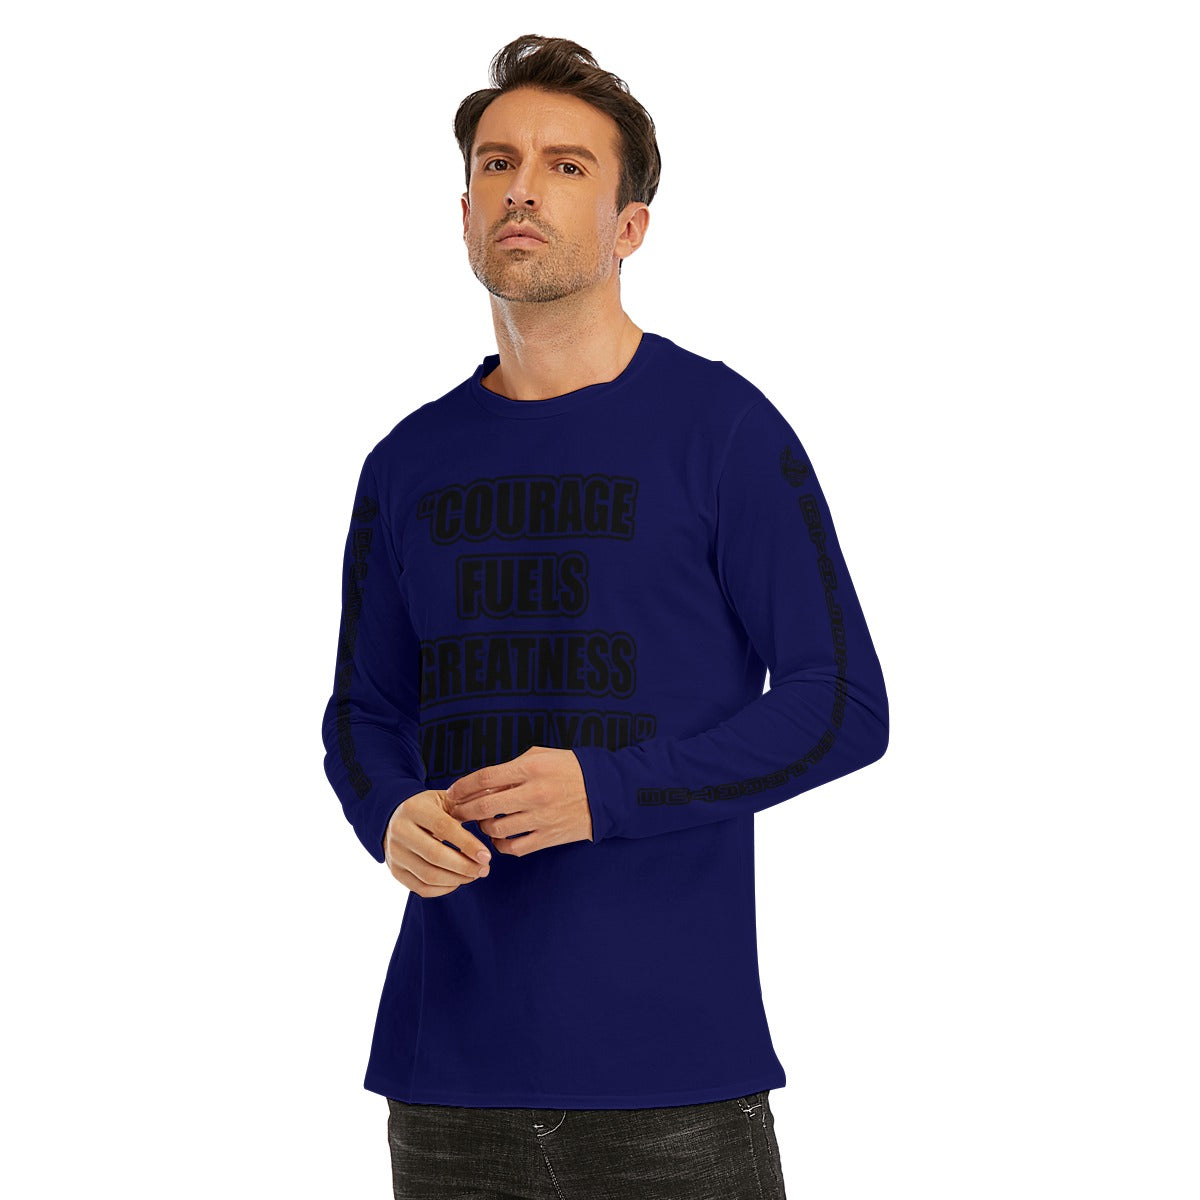 
                  
                    A.A. Navy BL Long Sleeve Courage fuels greatness
                  
                